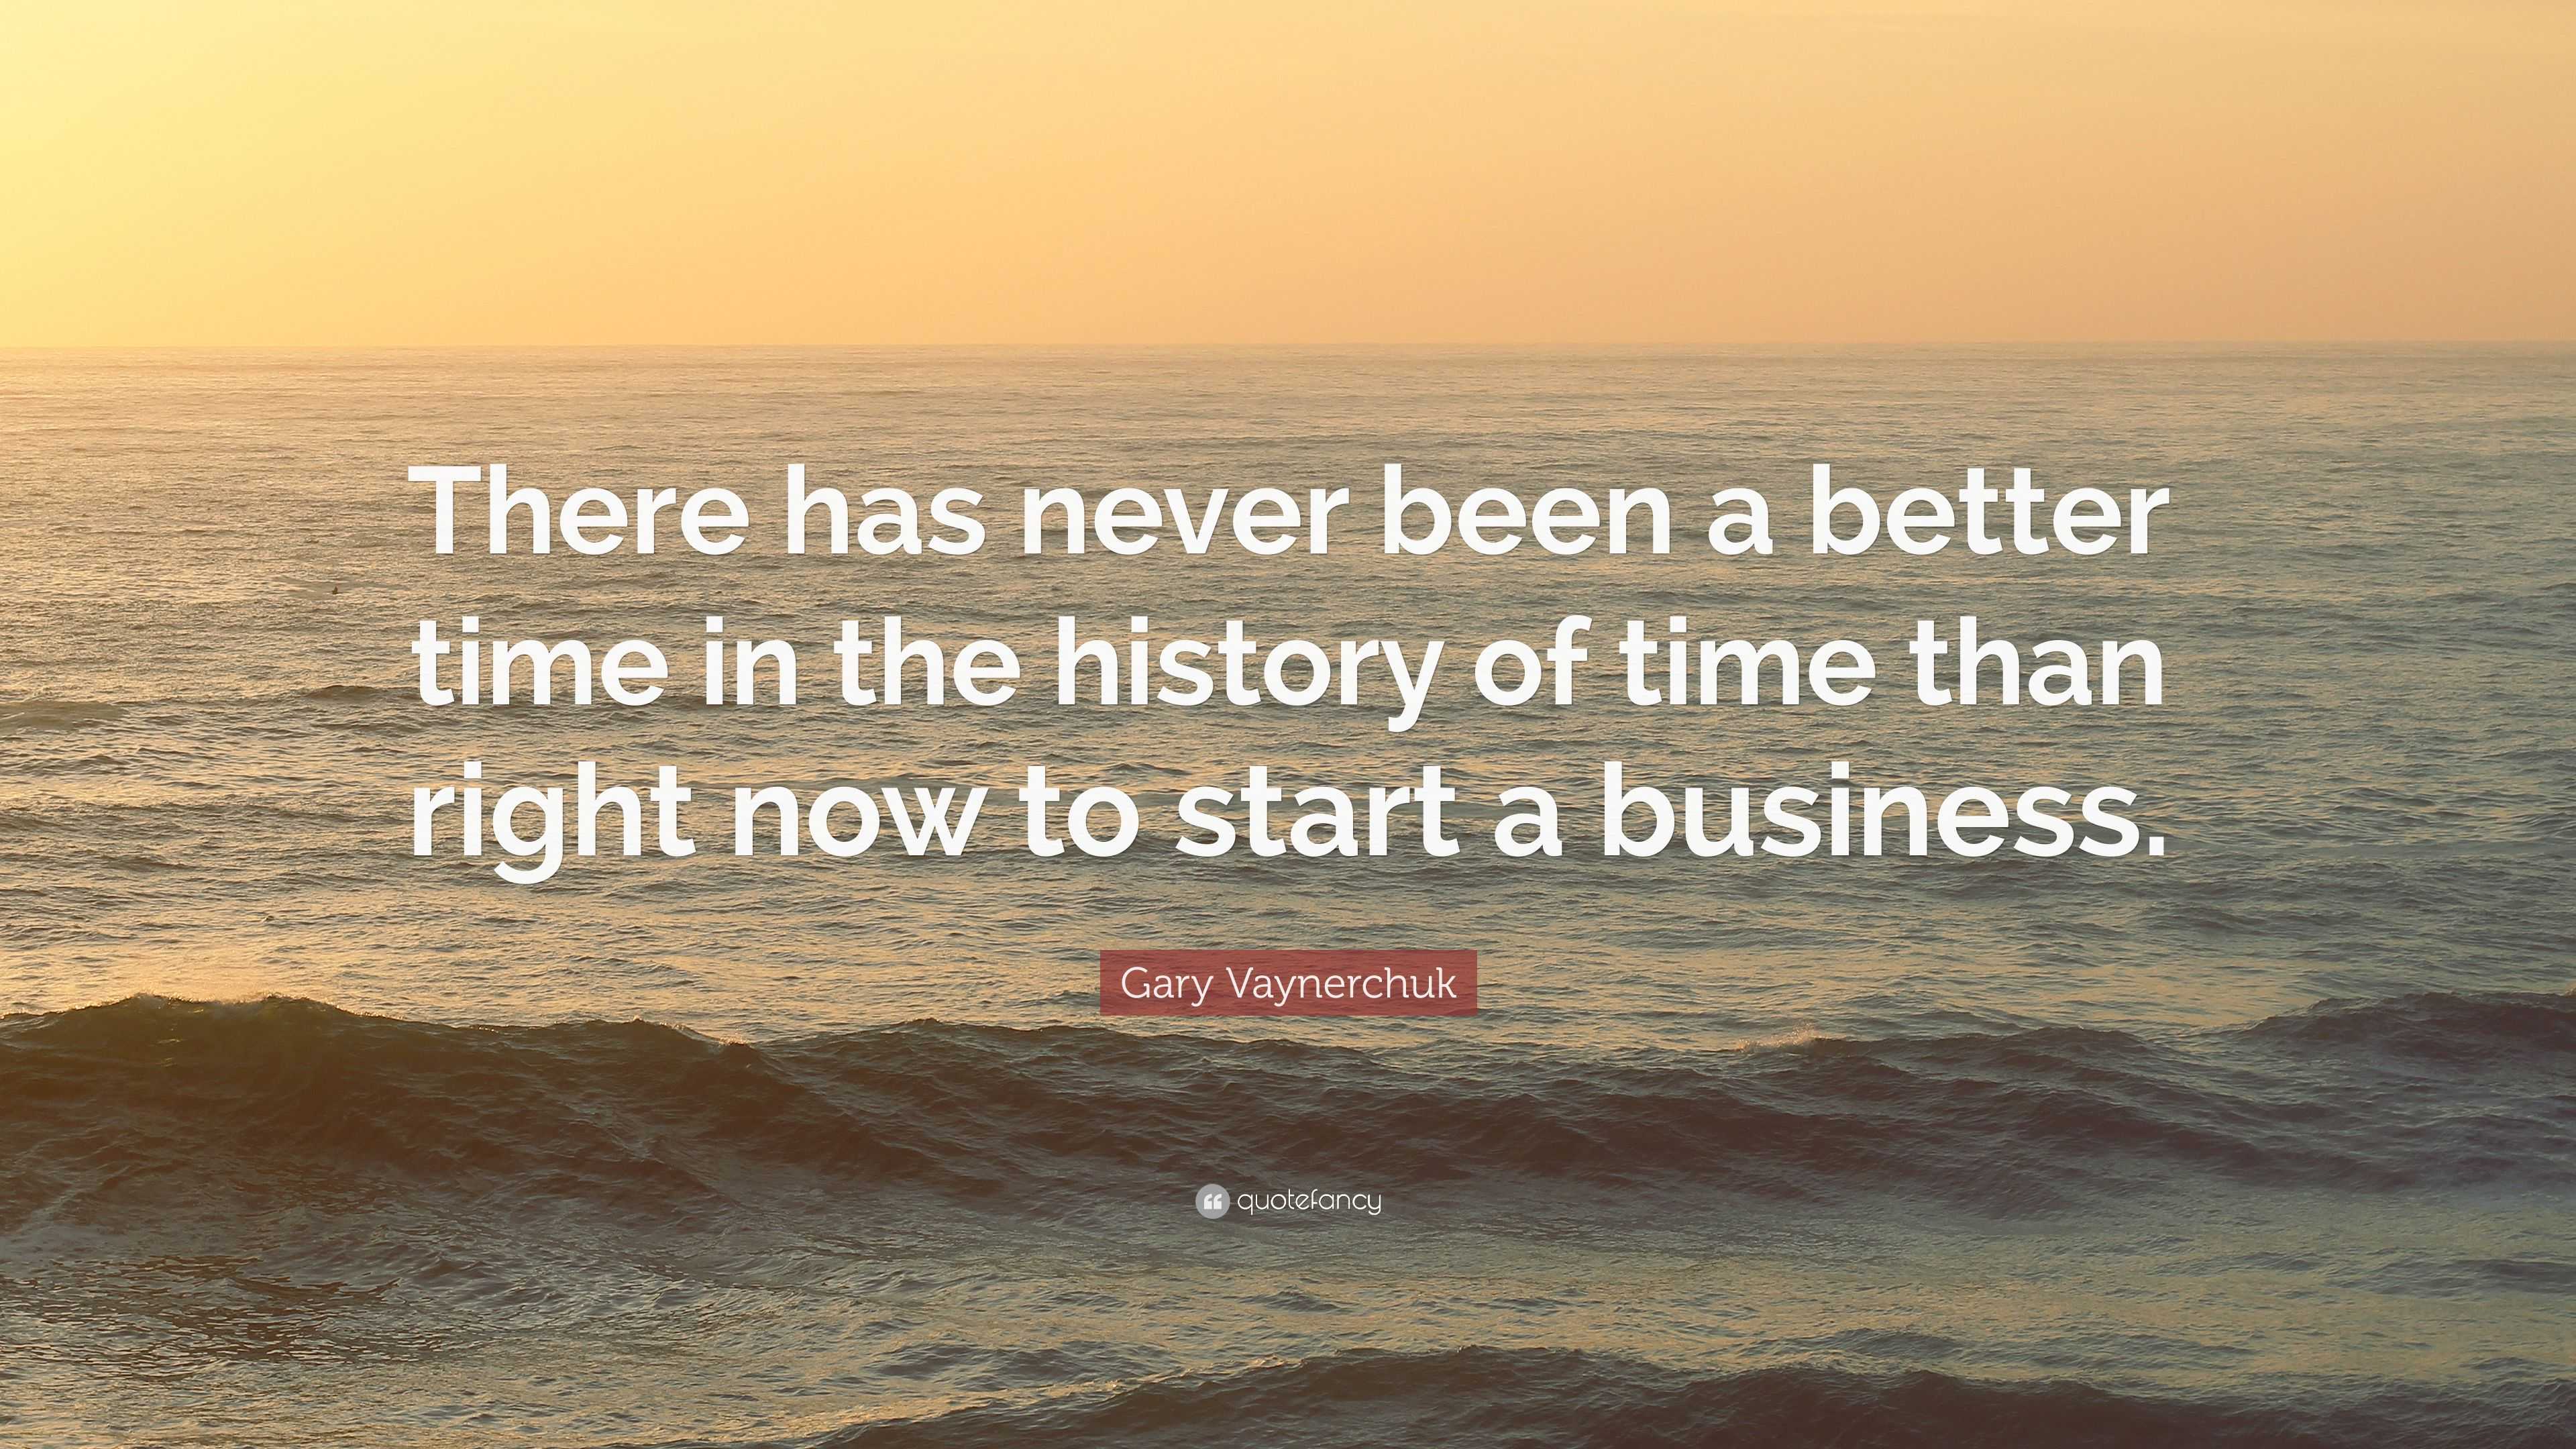 Perth heroin Besætte Gary Vaynerchuk Quote: “There has never been a better time in the history  of time than